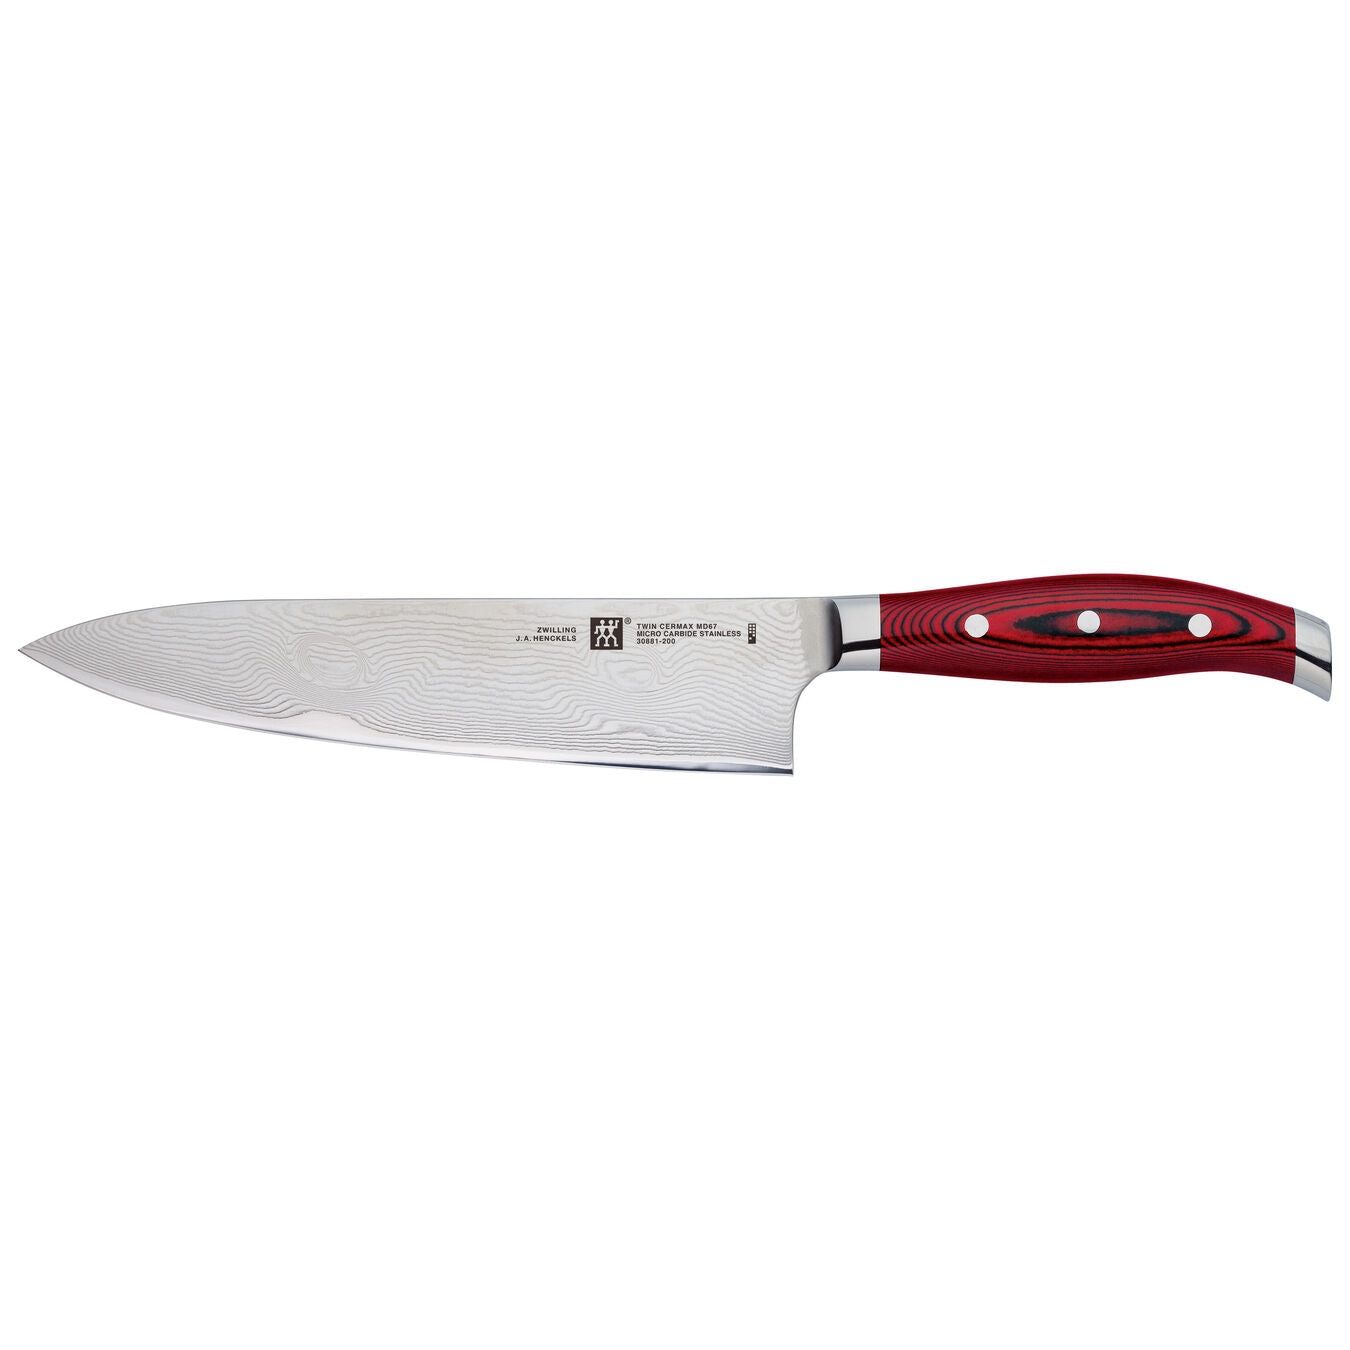 Twin Chef Knife - Cermax MD67 - 8"